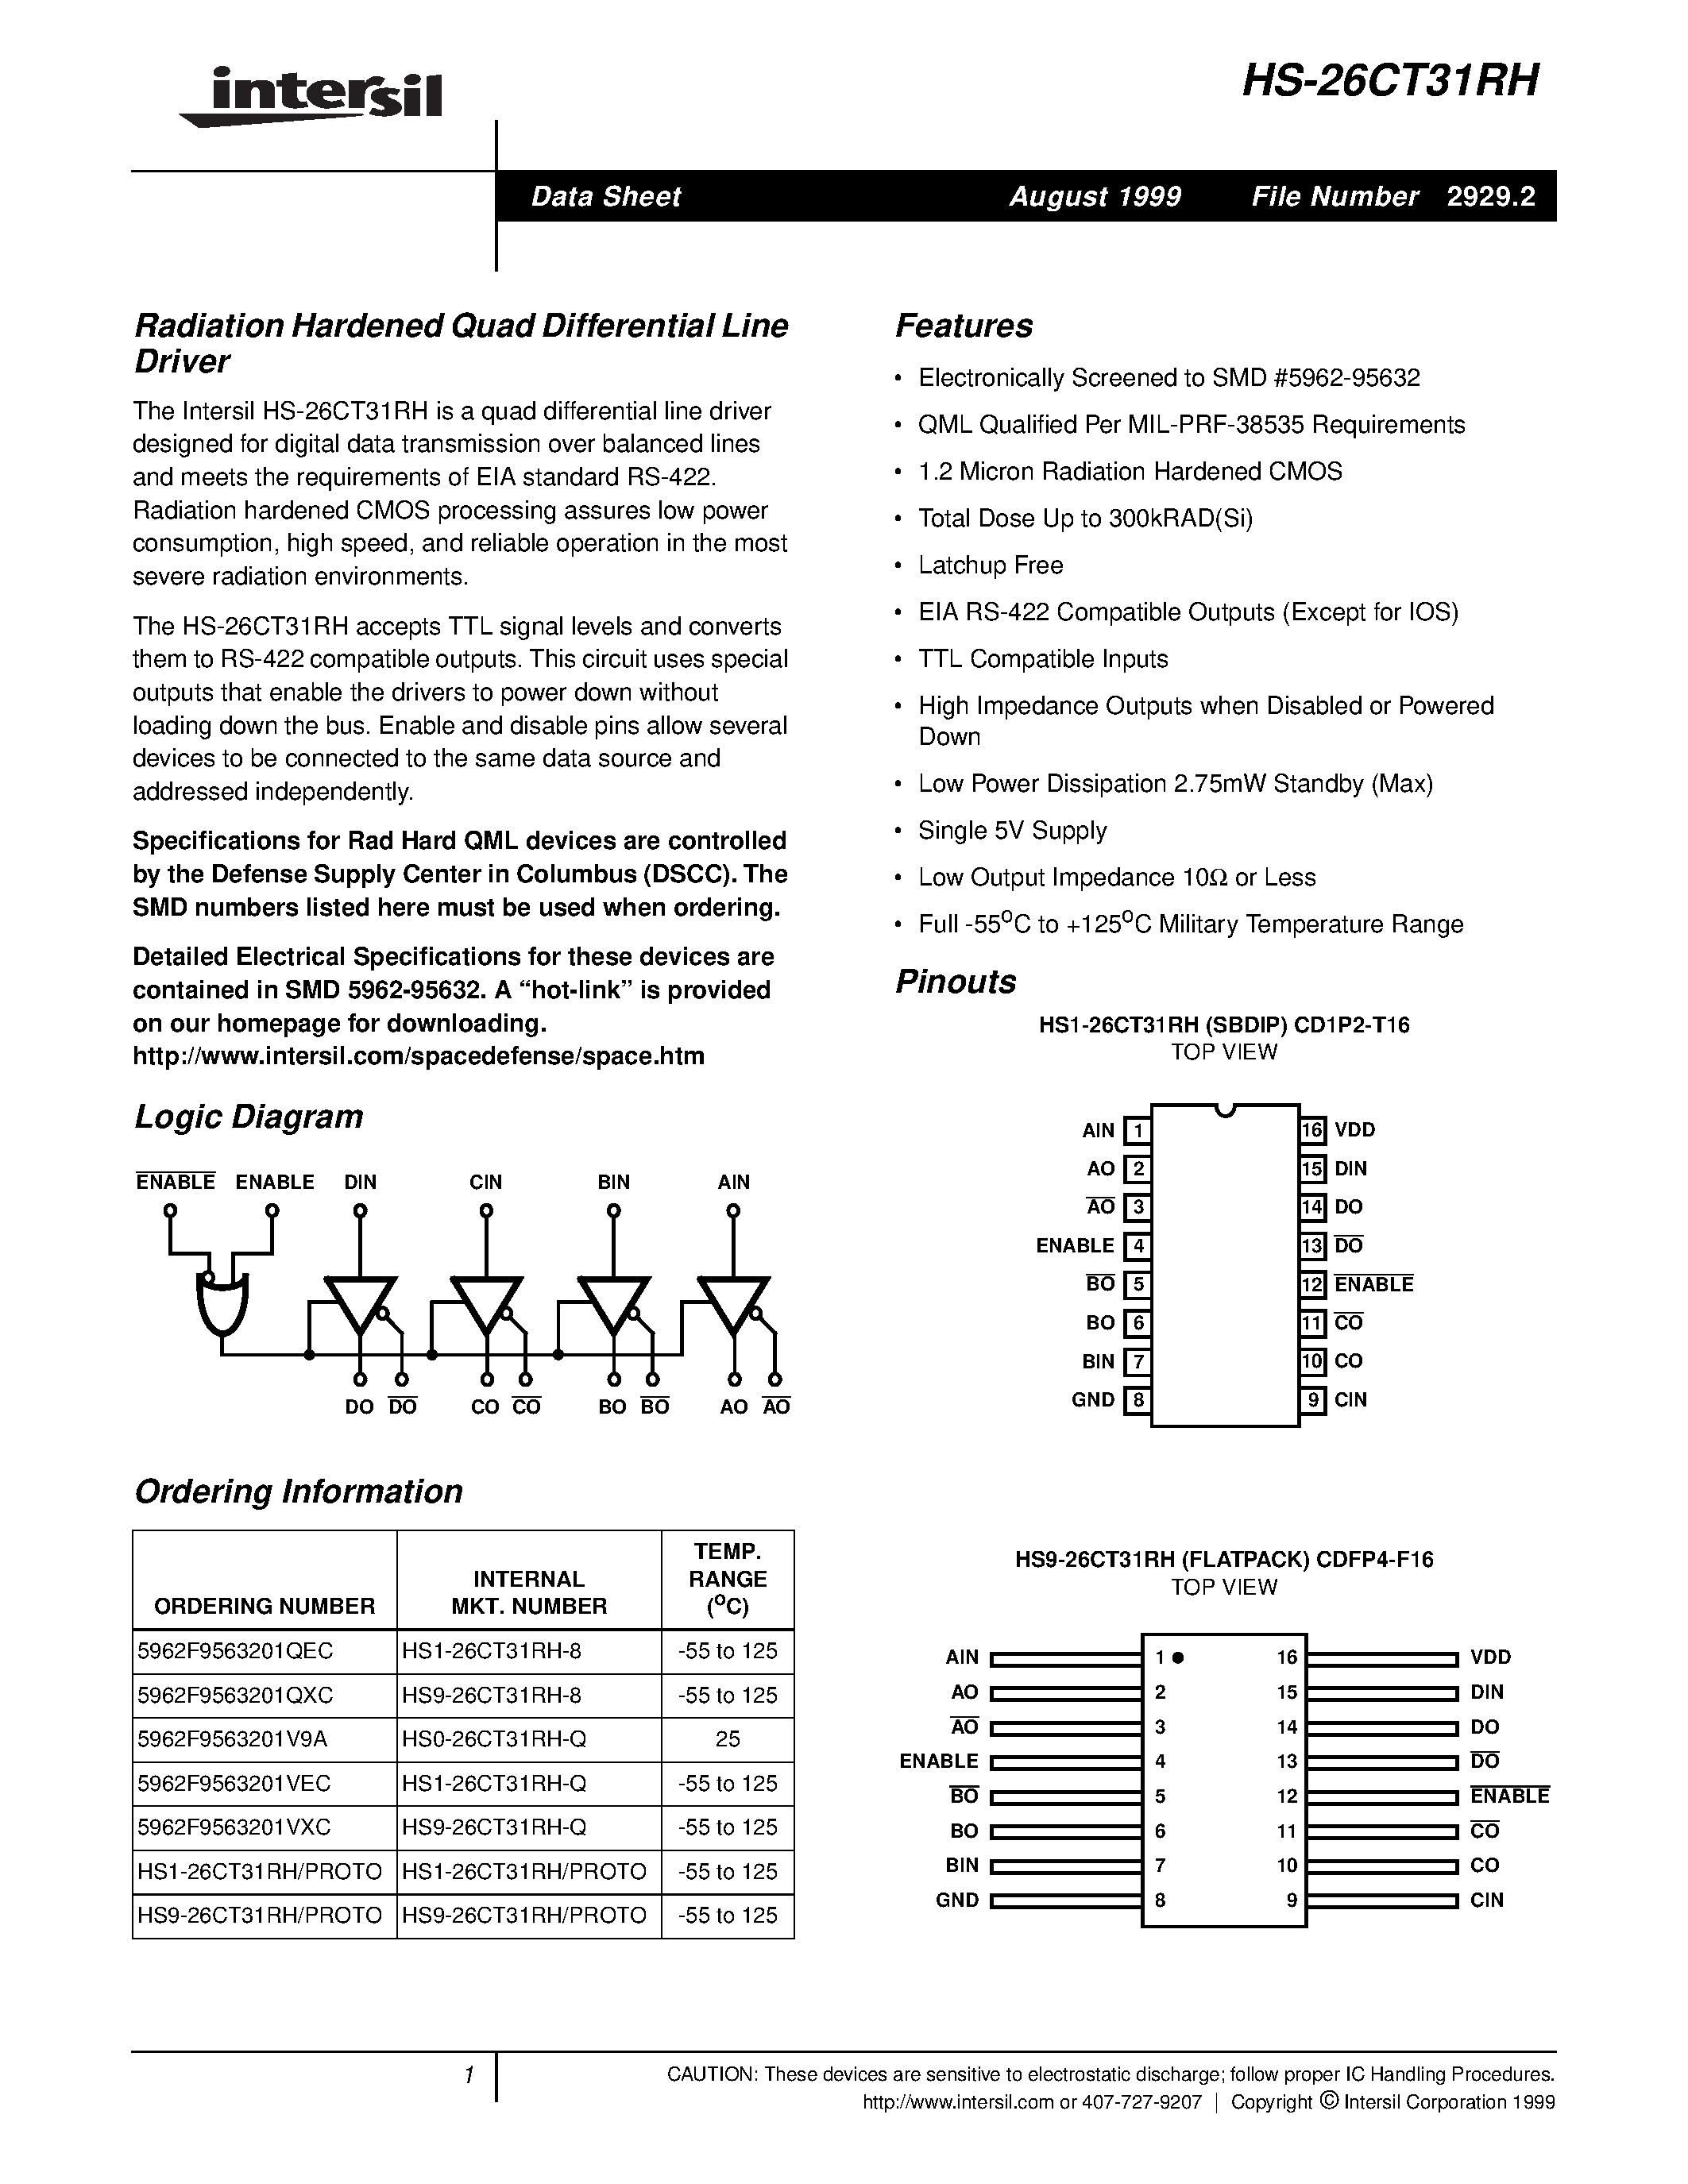 Datasheet HS1-26CT31RH-Q - Radiation Hardened Quad Differential Line Driver page 1